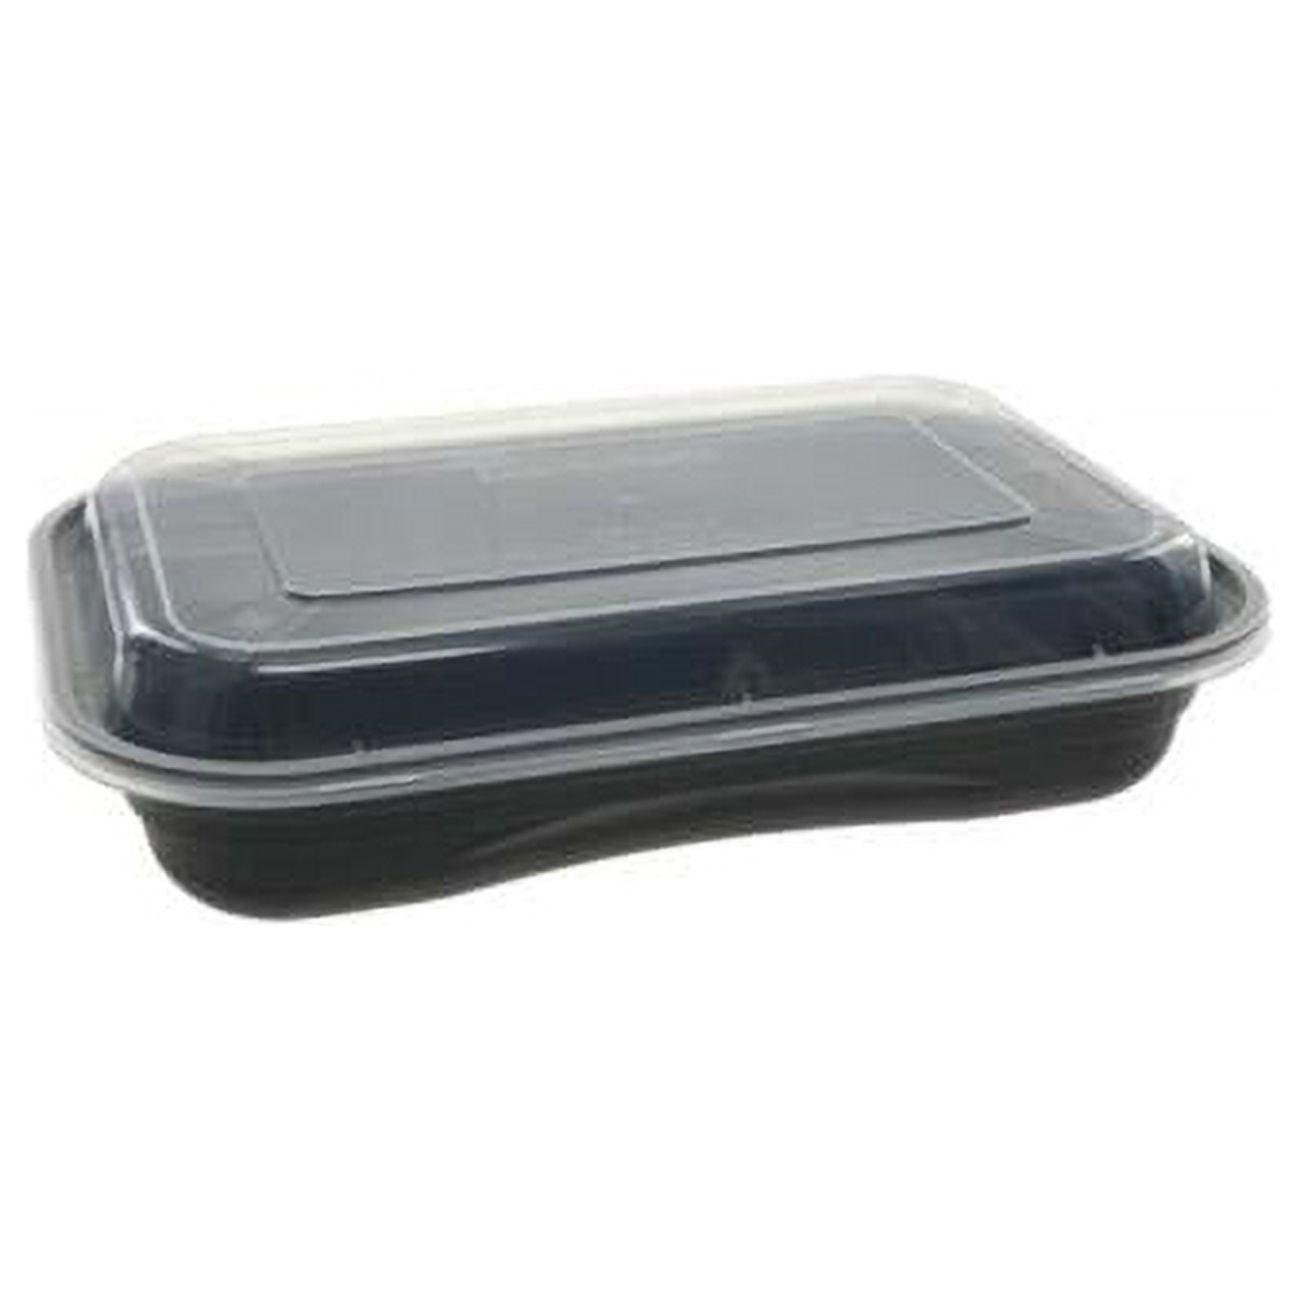 Nv2grt2786b Cpc 27 Oz Versa2go Rectangle Combo P-p Container, Black & Clear - Case Of 150